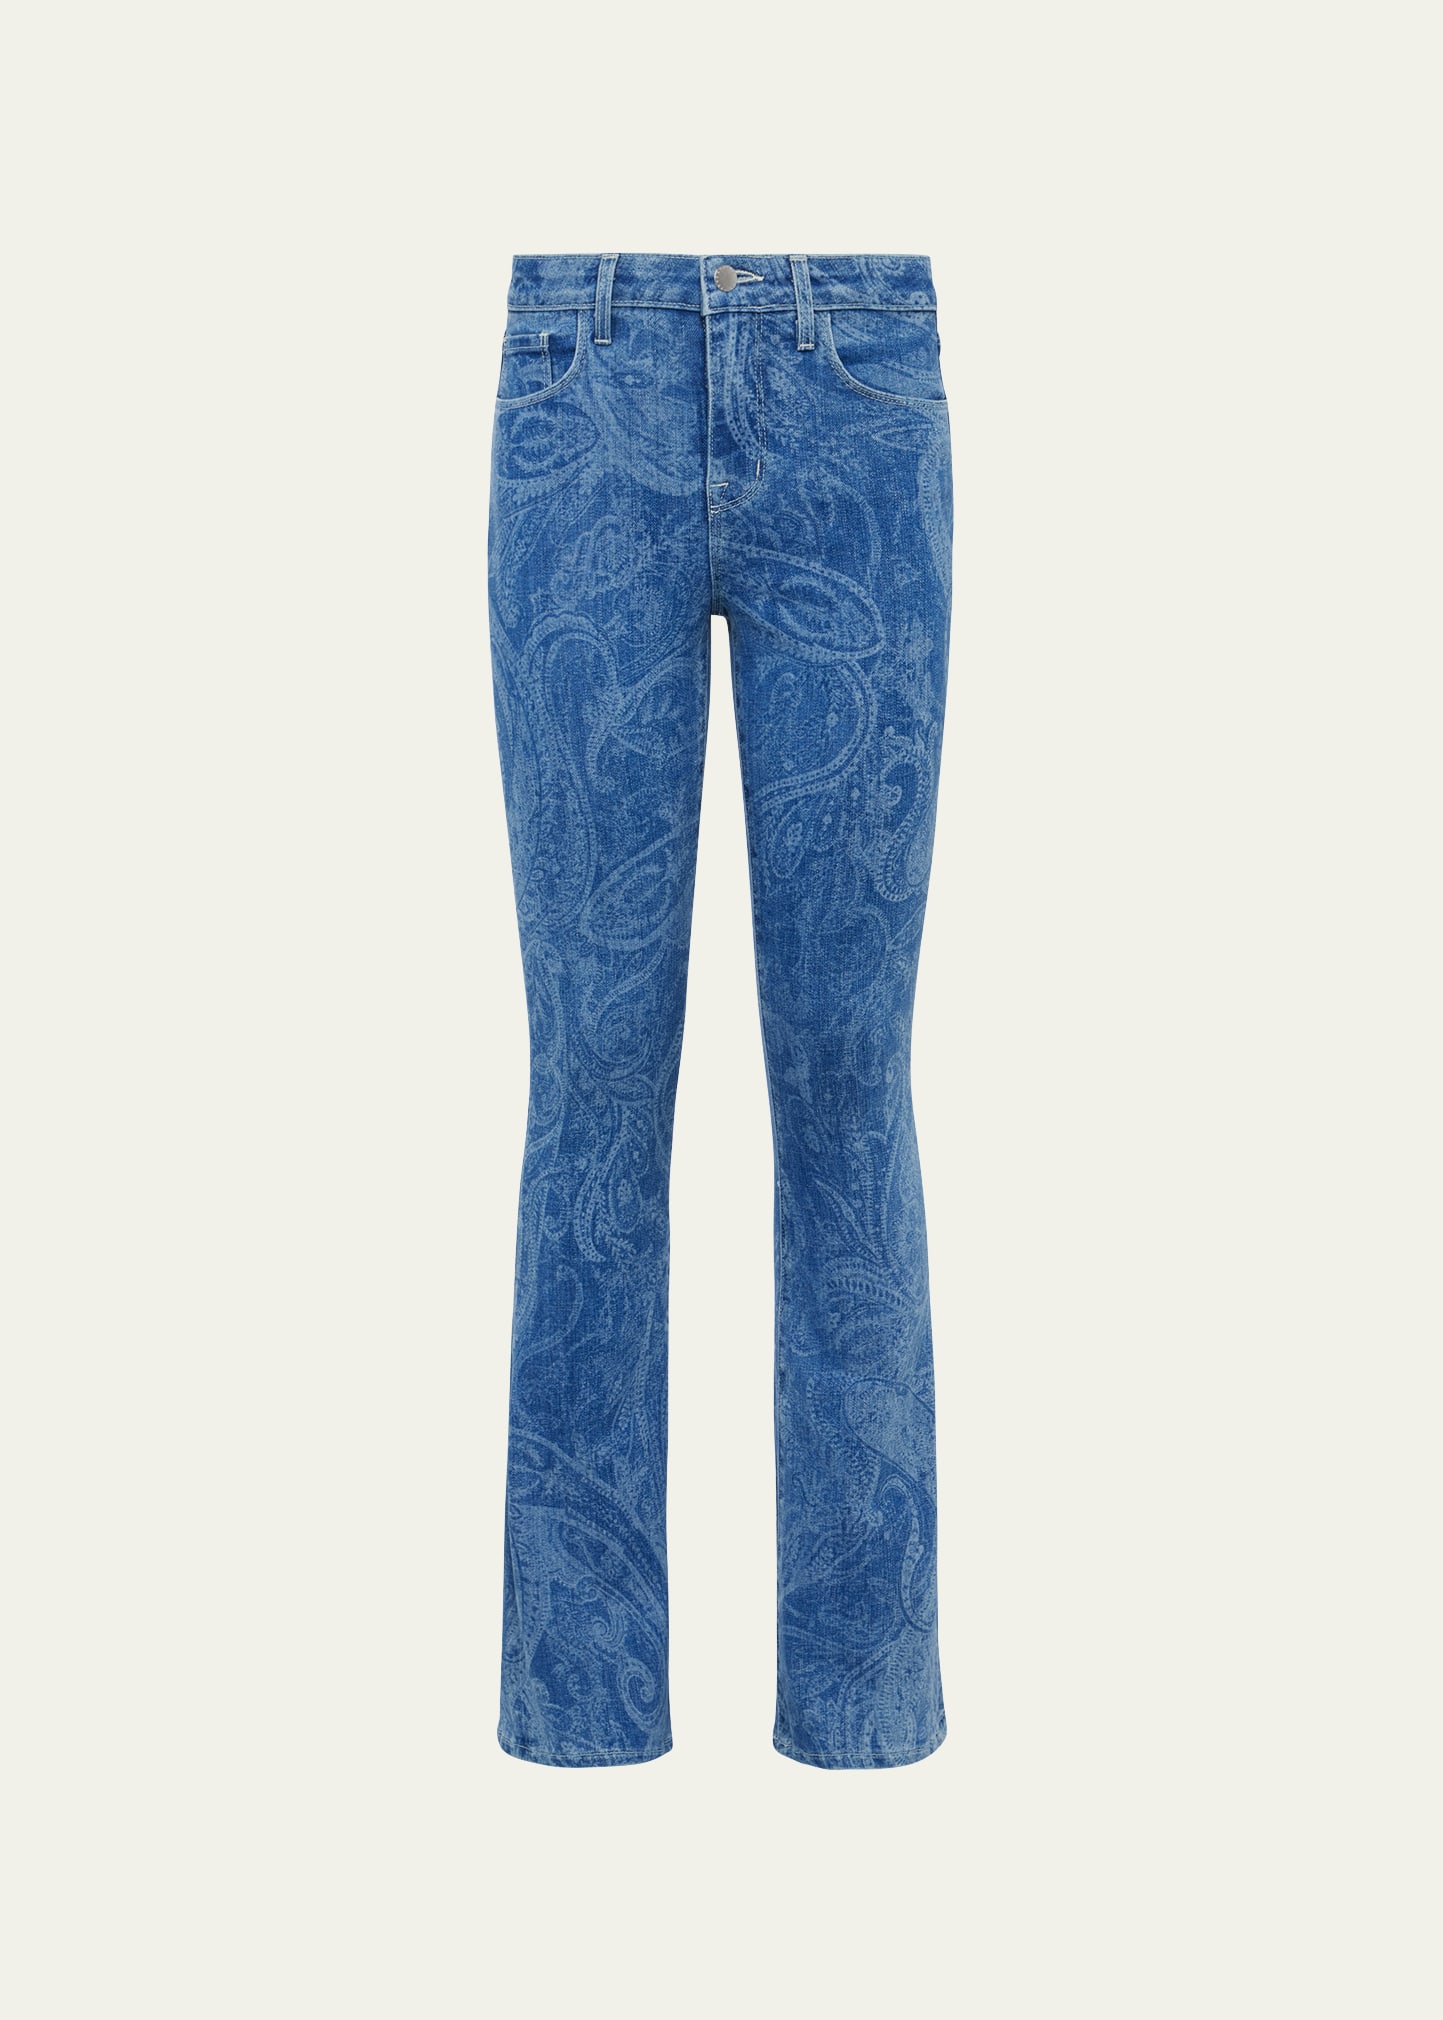 L Agence Stassi High-rise Sleek Baby Bootcut Jeans In Paisley